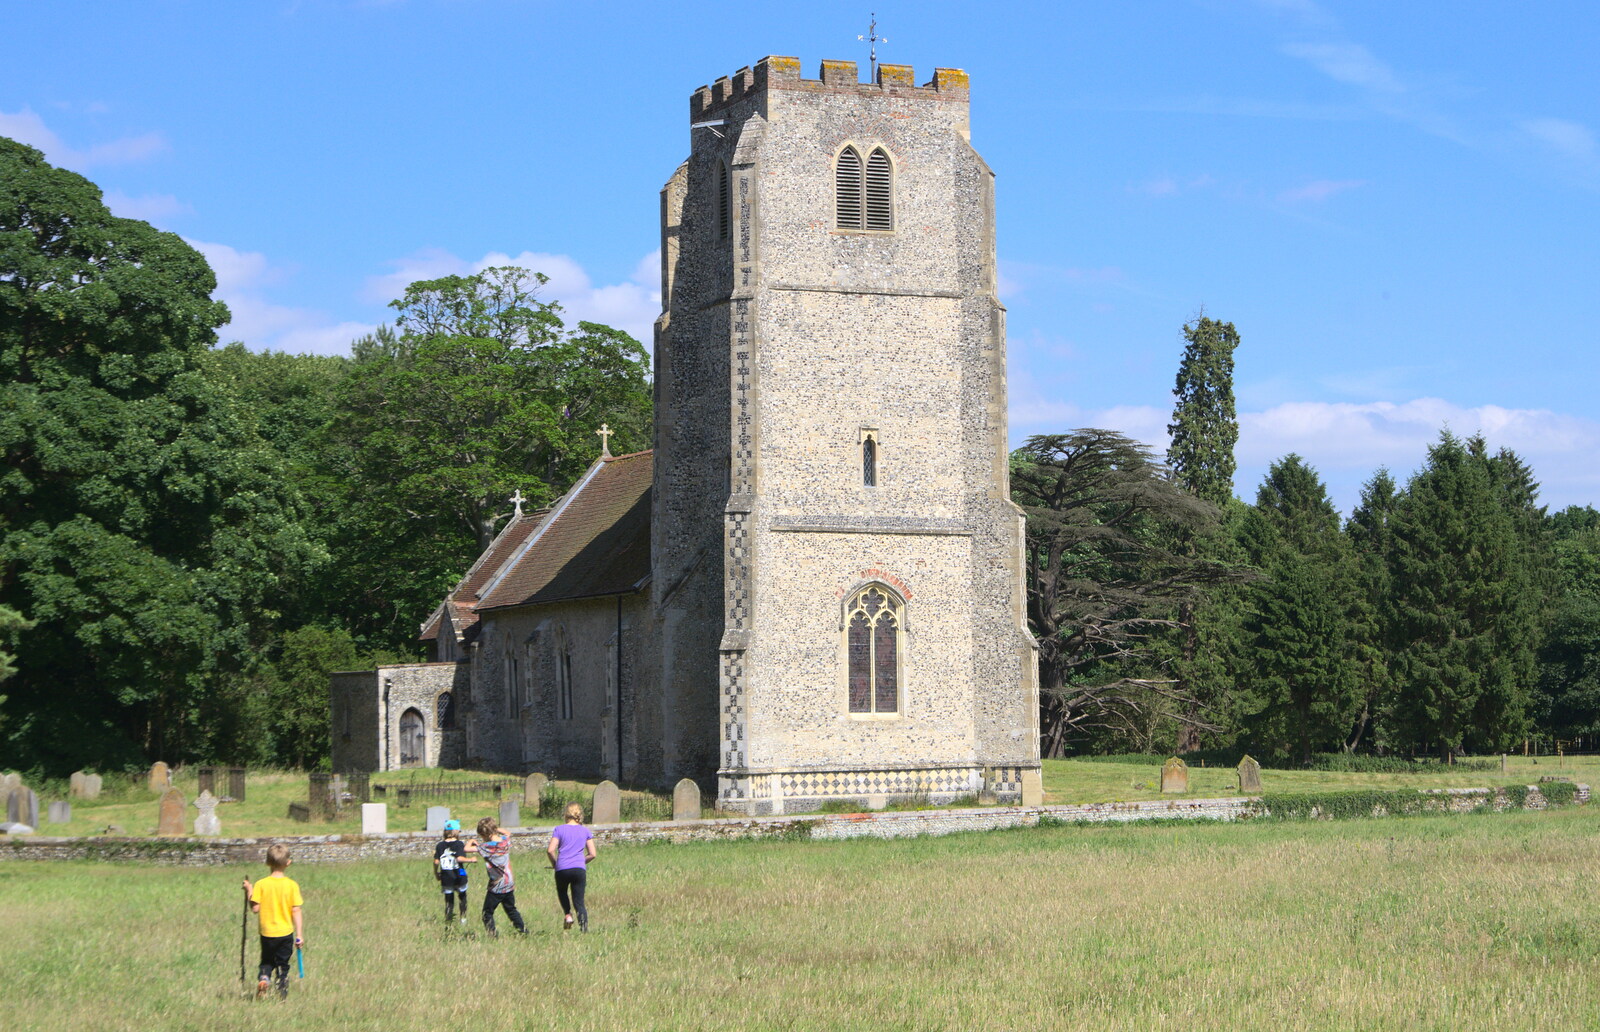 The redundant church of All Saints in West Harling from Camping at Dower House, West Harling, Norfolk - 1st July 2017